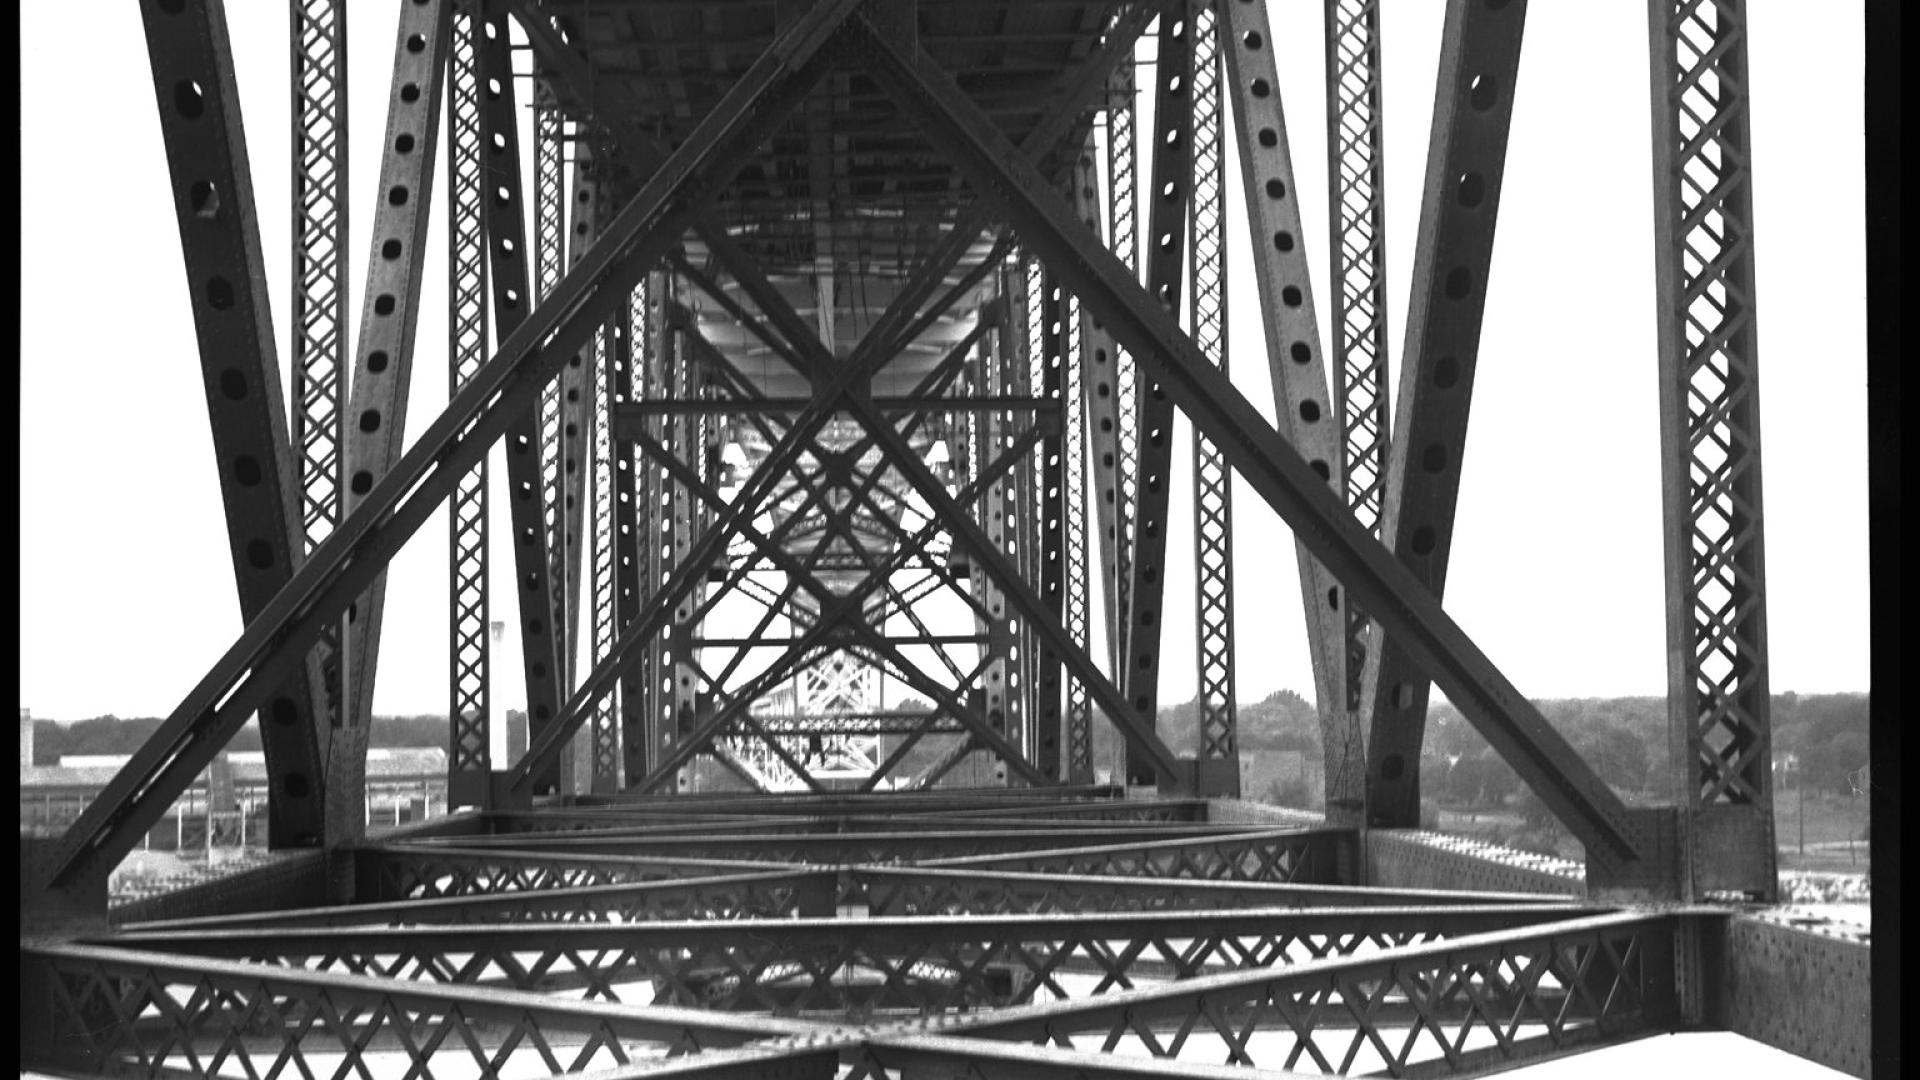 Inside perspective of steel bridge. The bridge is made out of iron beams.